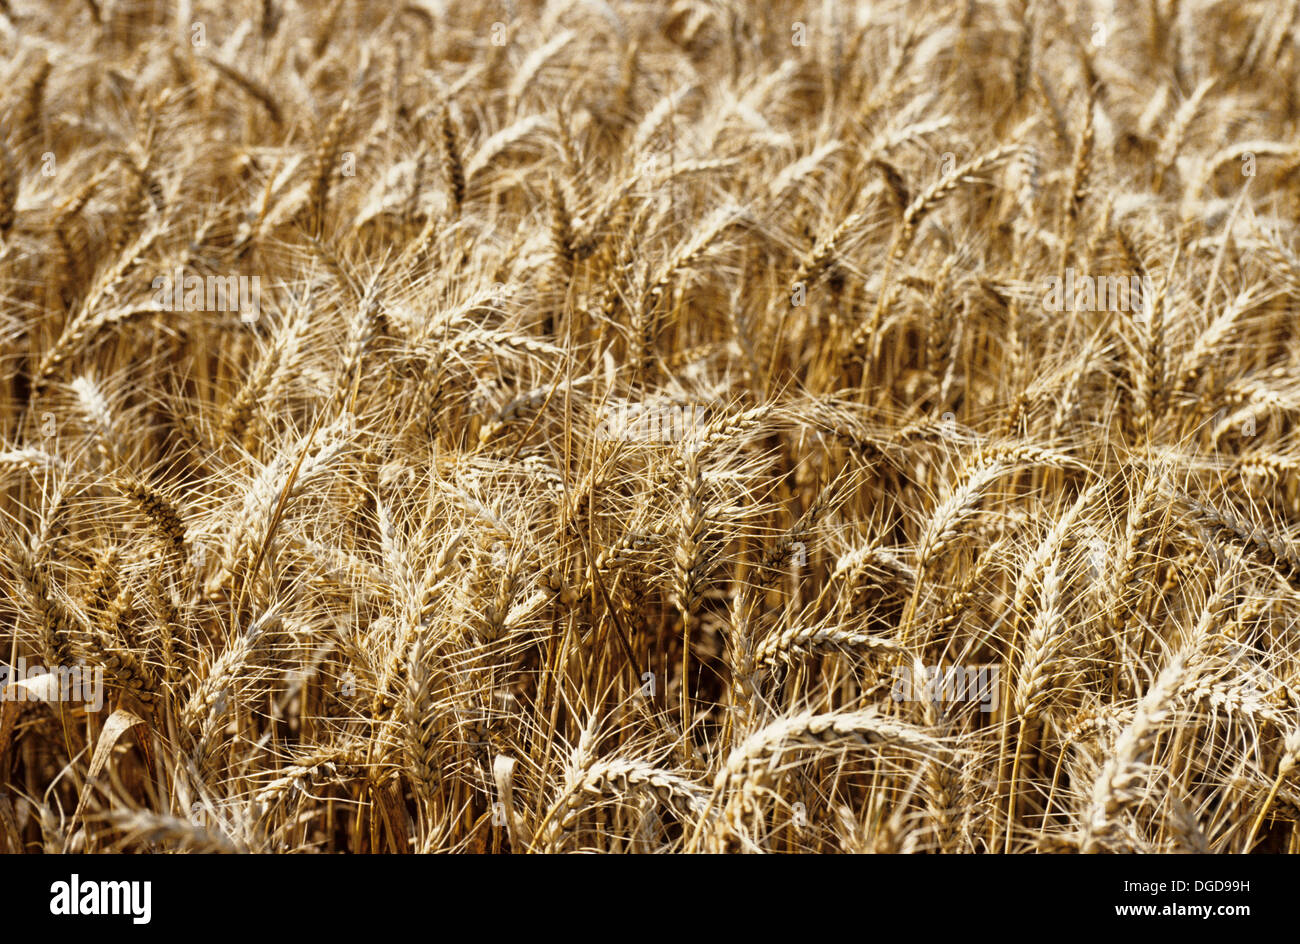 Barley, a member of the grass family, is a major cereal grain. Important uses include use as animal fodder, as a source of fermentable material for beer and certain distilled beverages, and as a component of various health foods. Stock Photo